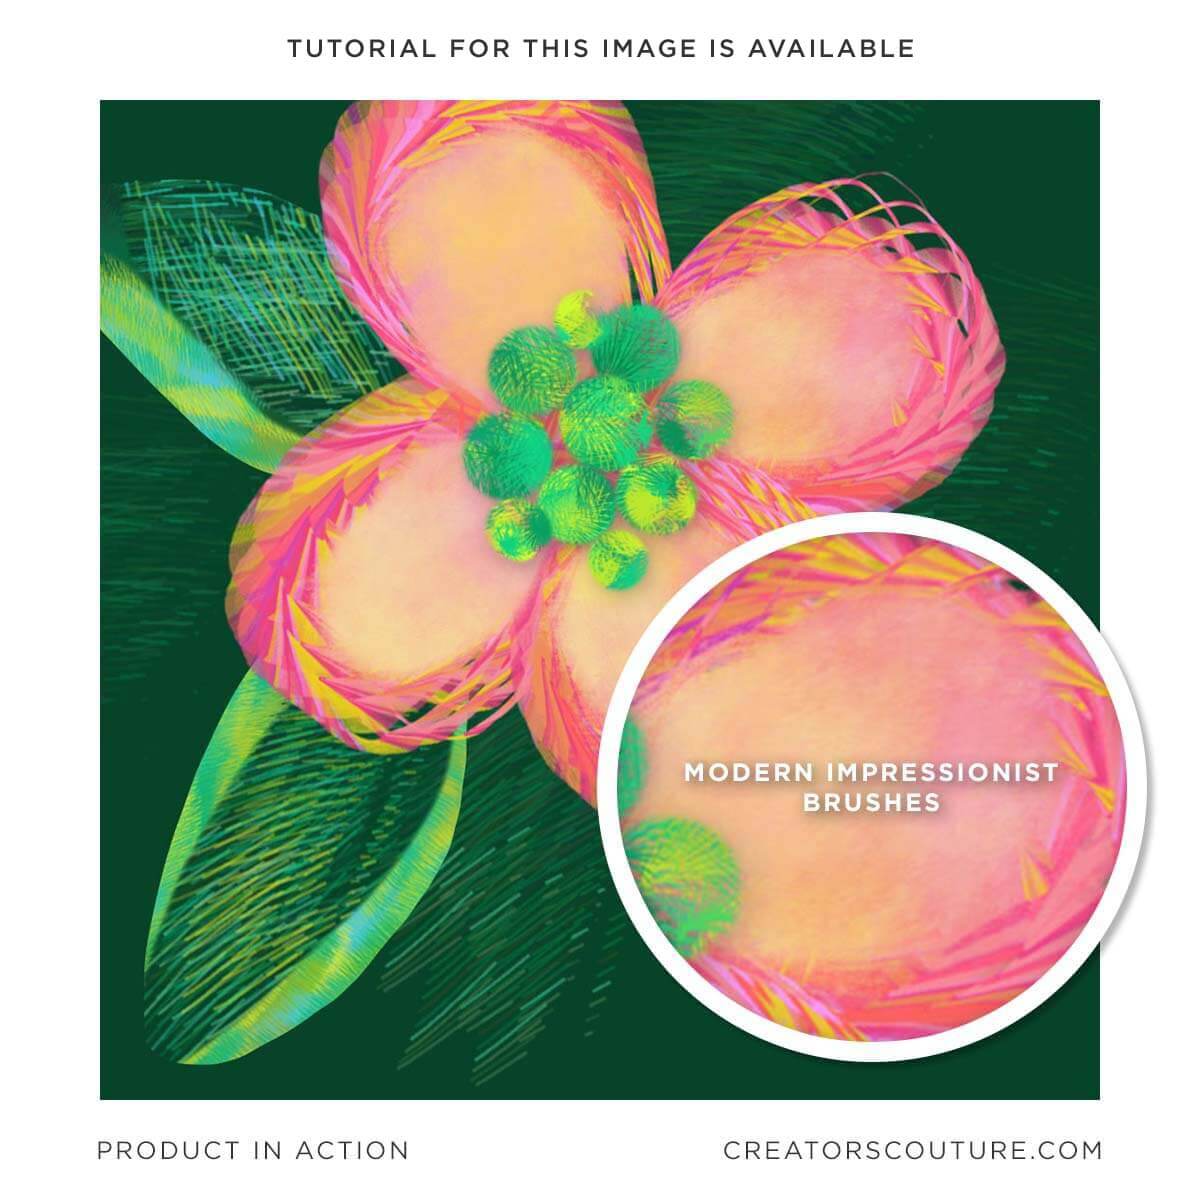 Abstract flower illustration, tropical colors, close-up of multicolor, impressionist brush strokes created in Photoshop